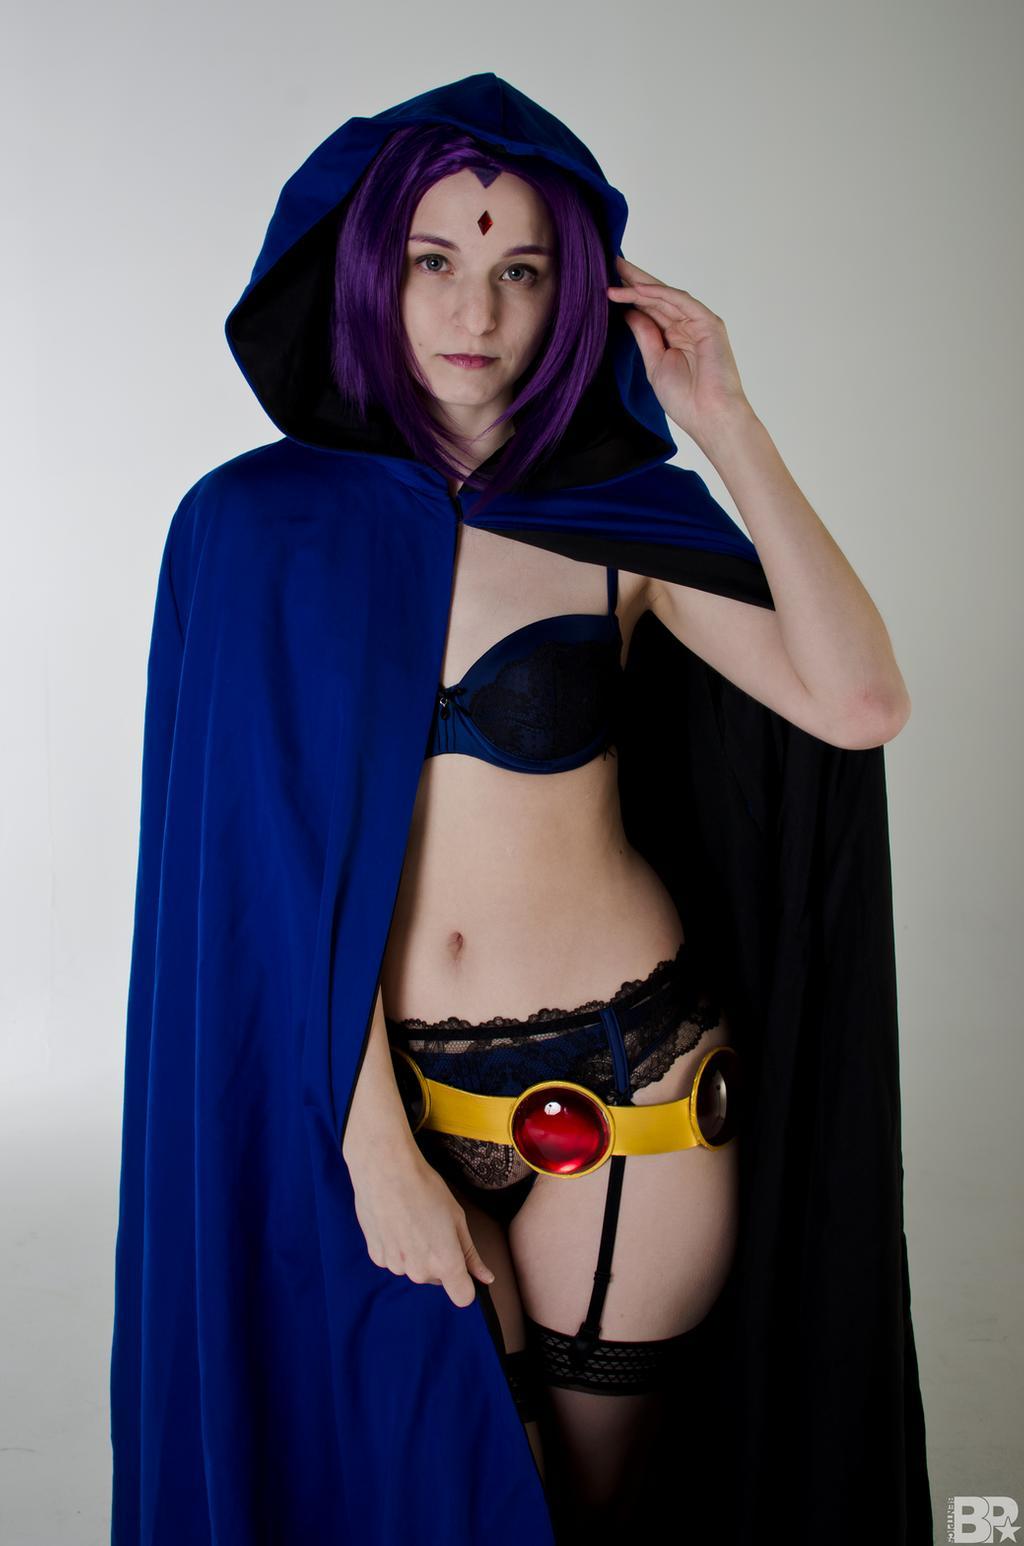 50+ Hot Pictures Of Raven From Teen Titans, DC Comics. 26